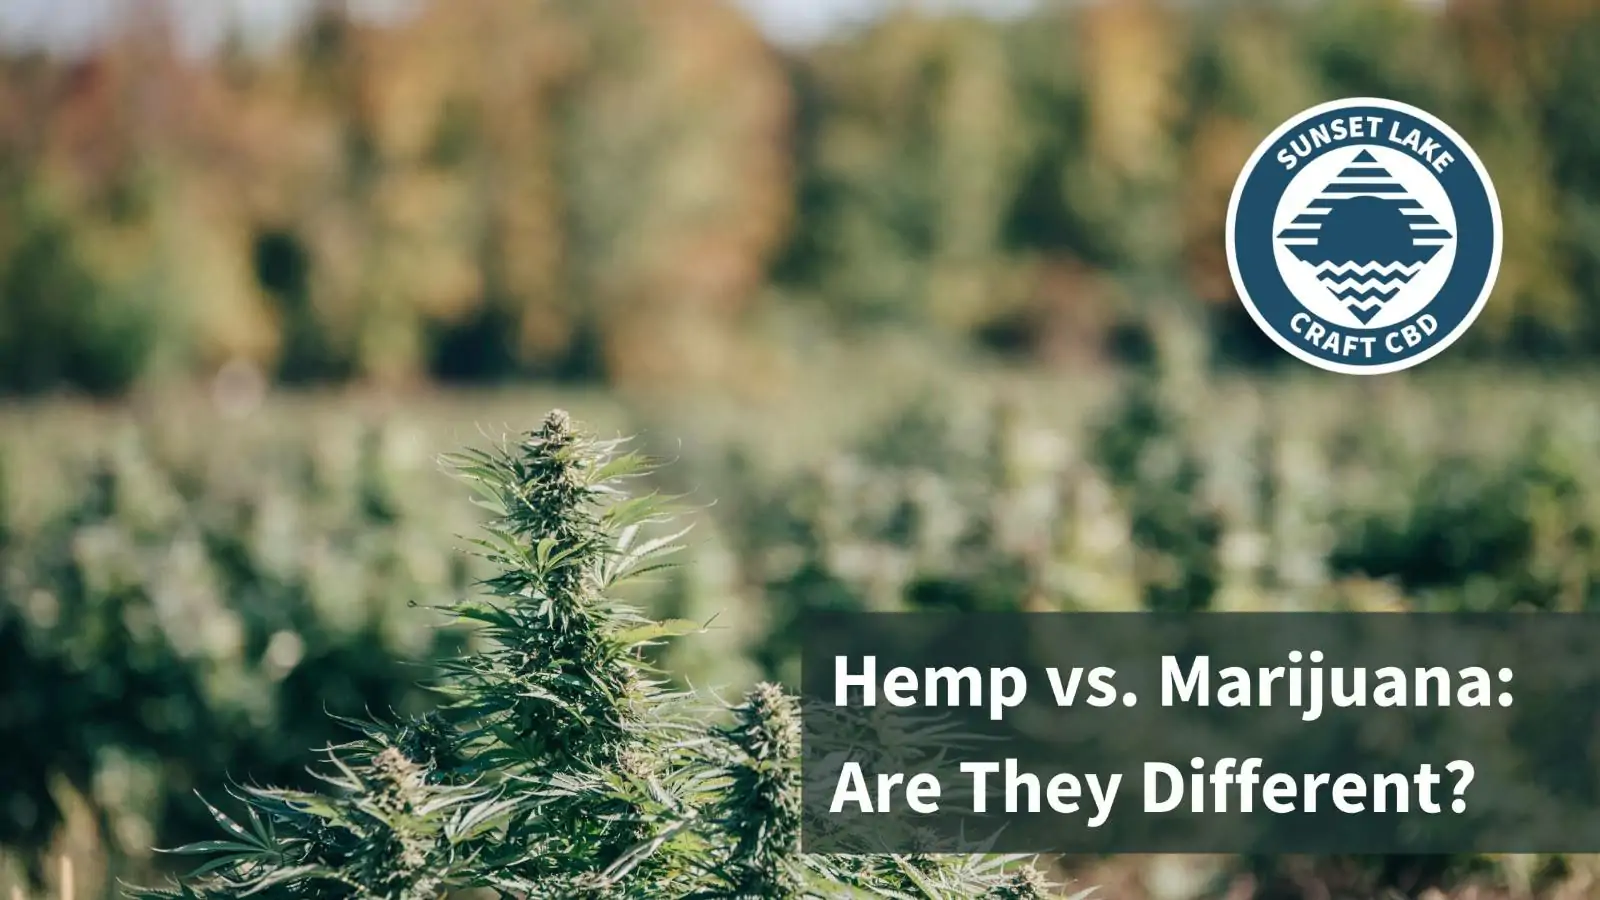 A flowering hemp plant in the foreground with a field in the background. Text overlaid reads "Hemp vs. Marijuana: Are They Different?"